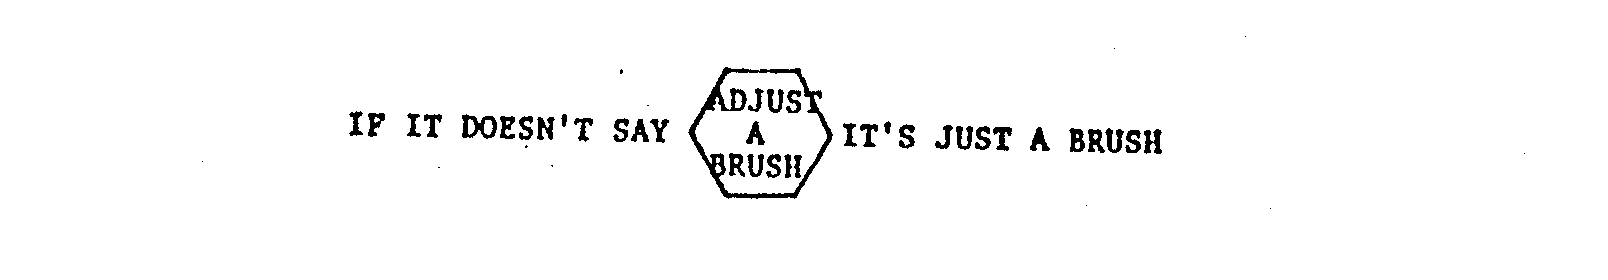  IF IT DOESN'T SAY ADJUST A BRUSH IT'S JUST A BRUSH